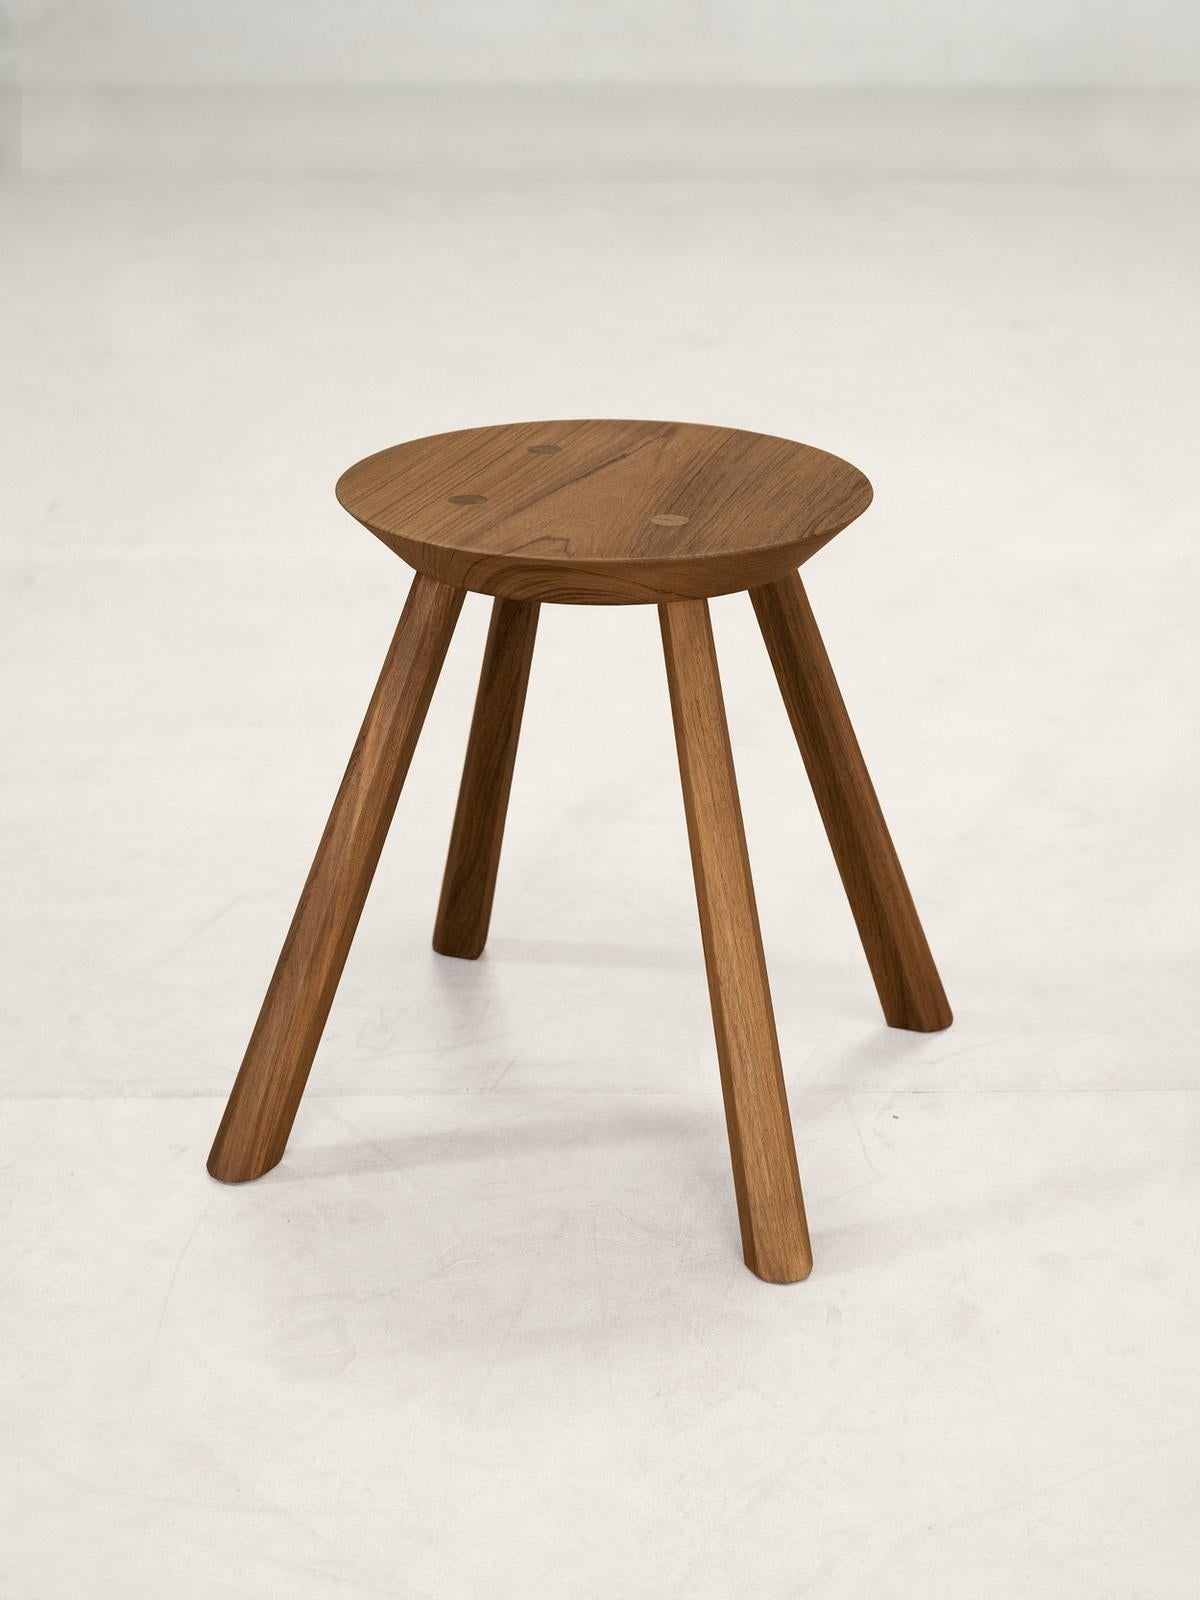 21st Century Designed Stool Teak Wood Brown


The design of the stool uses simple and strong methods of construction, relying on traditional joineries that were used before advanced technology became prevalent in woodworking. An example of this is